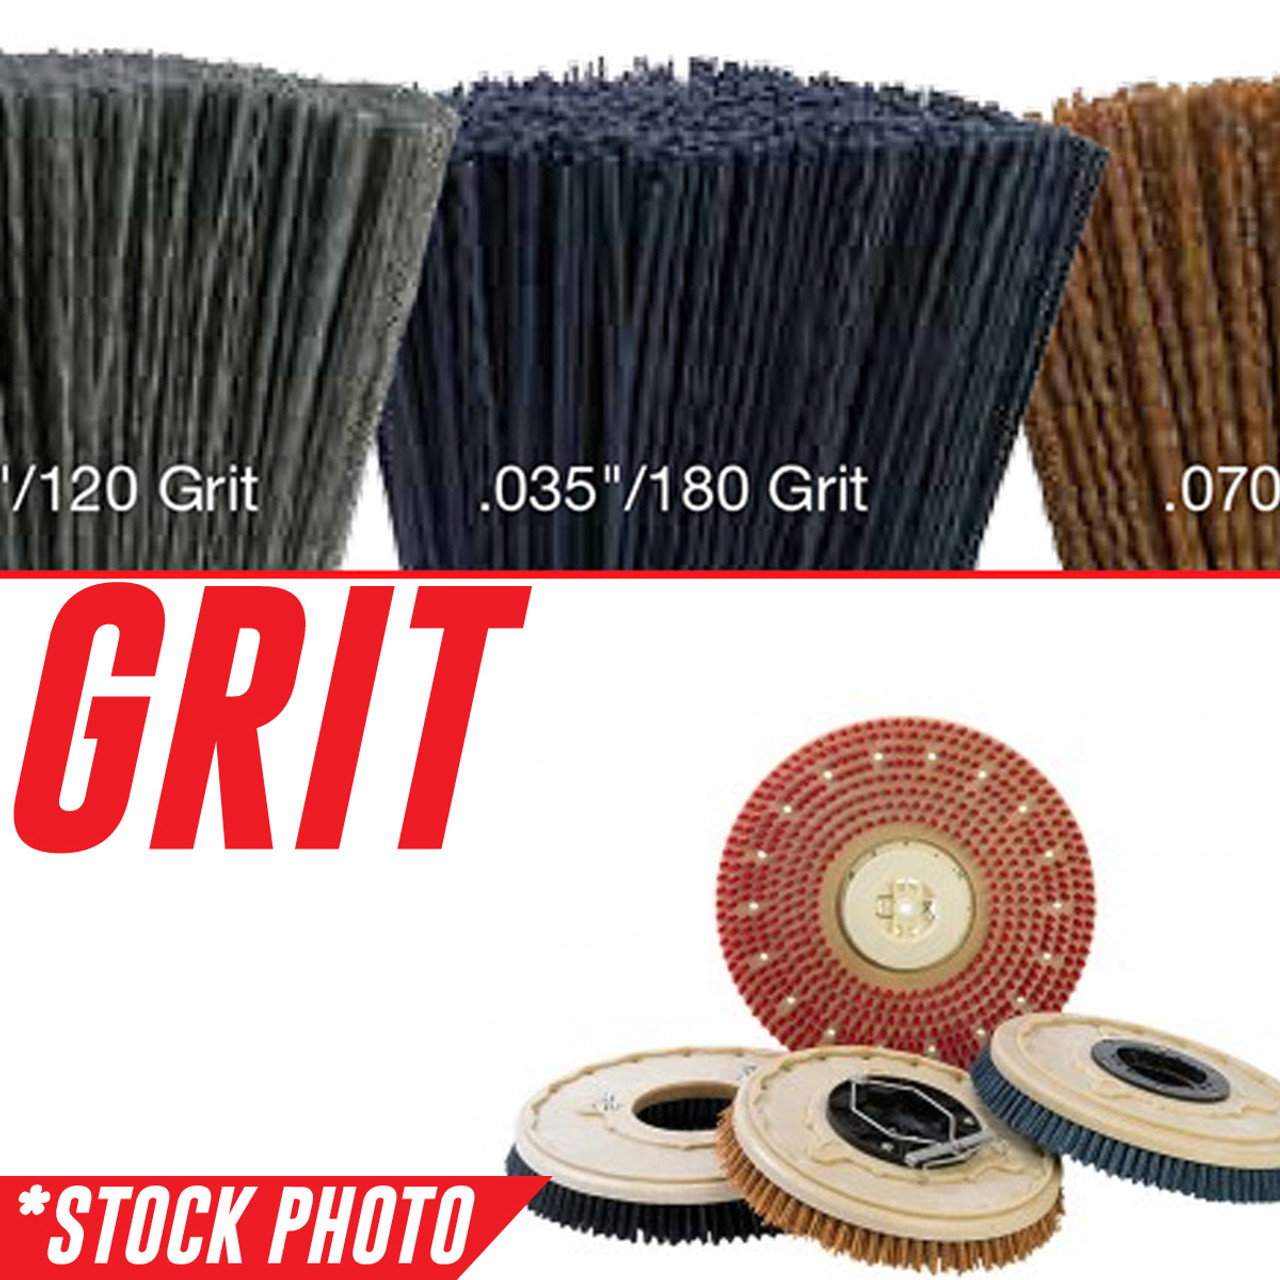 0765-274: 20" Rotary Brush .035"/180 Grit fits American-Lincoln Models SC7730-40, SC7740-40, Smart 40